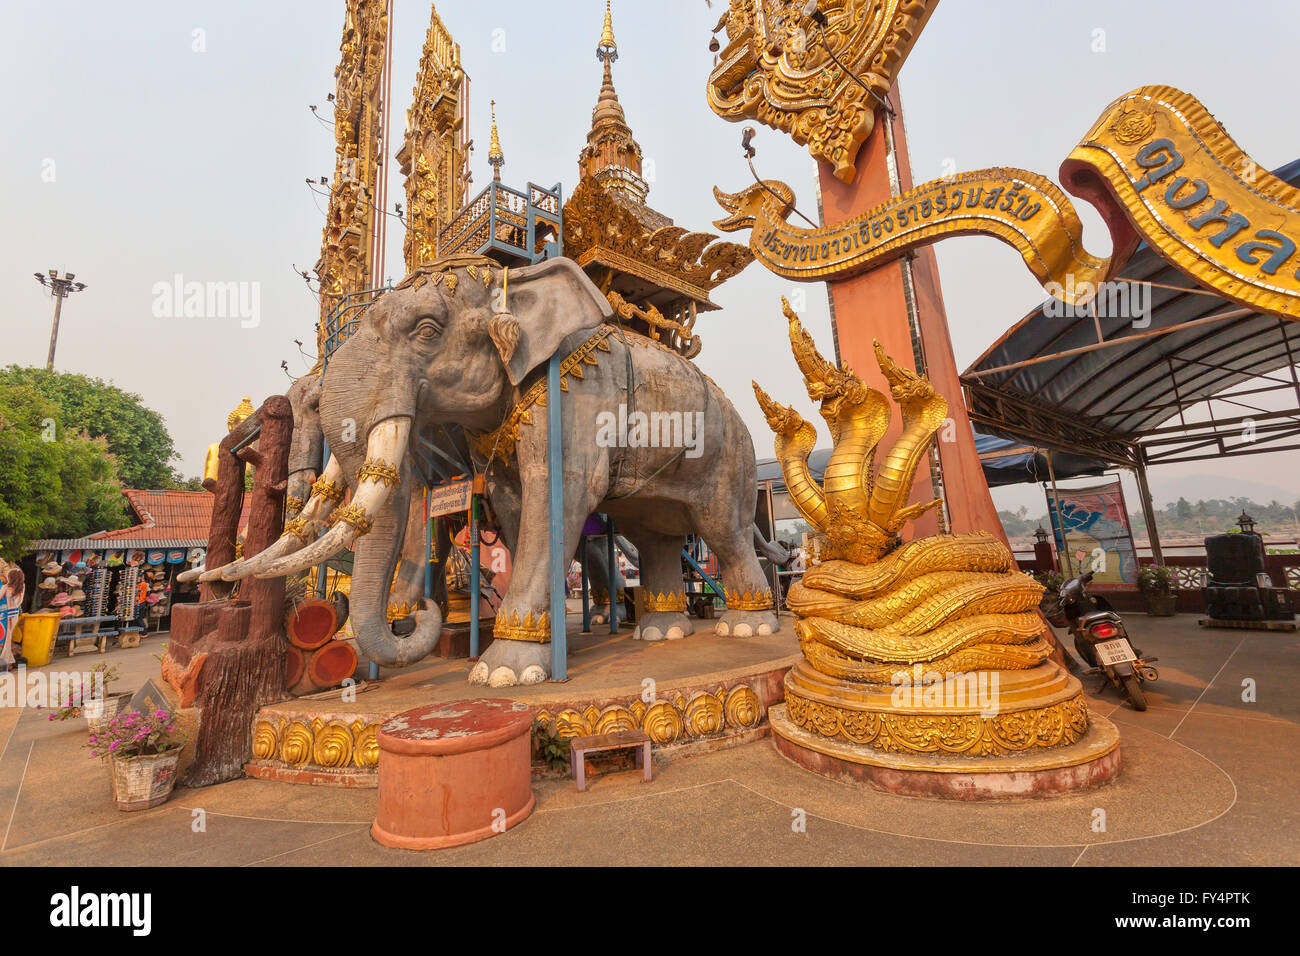 Golden Triangle in Northern Thailand and Laos Elephant statue Stock Photo